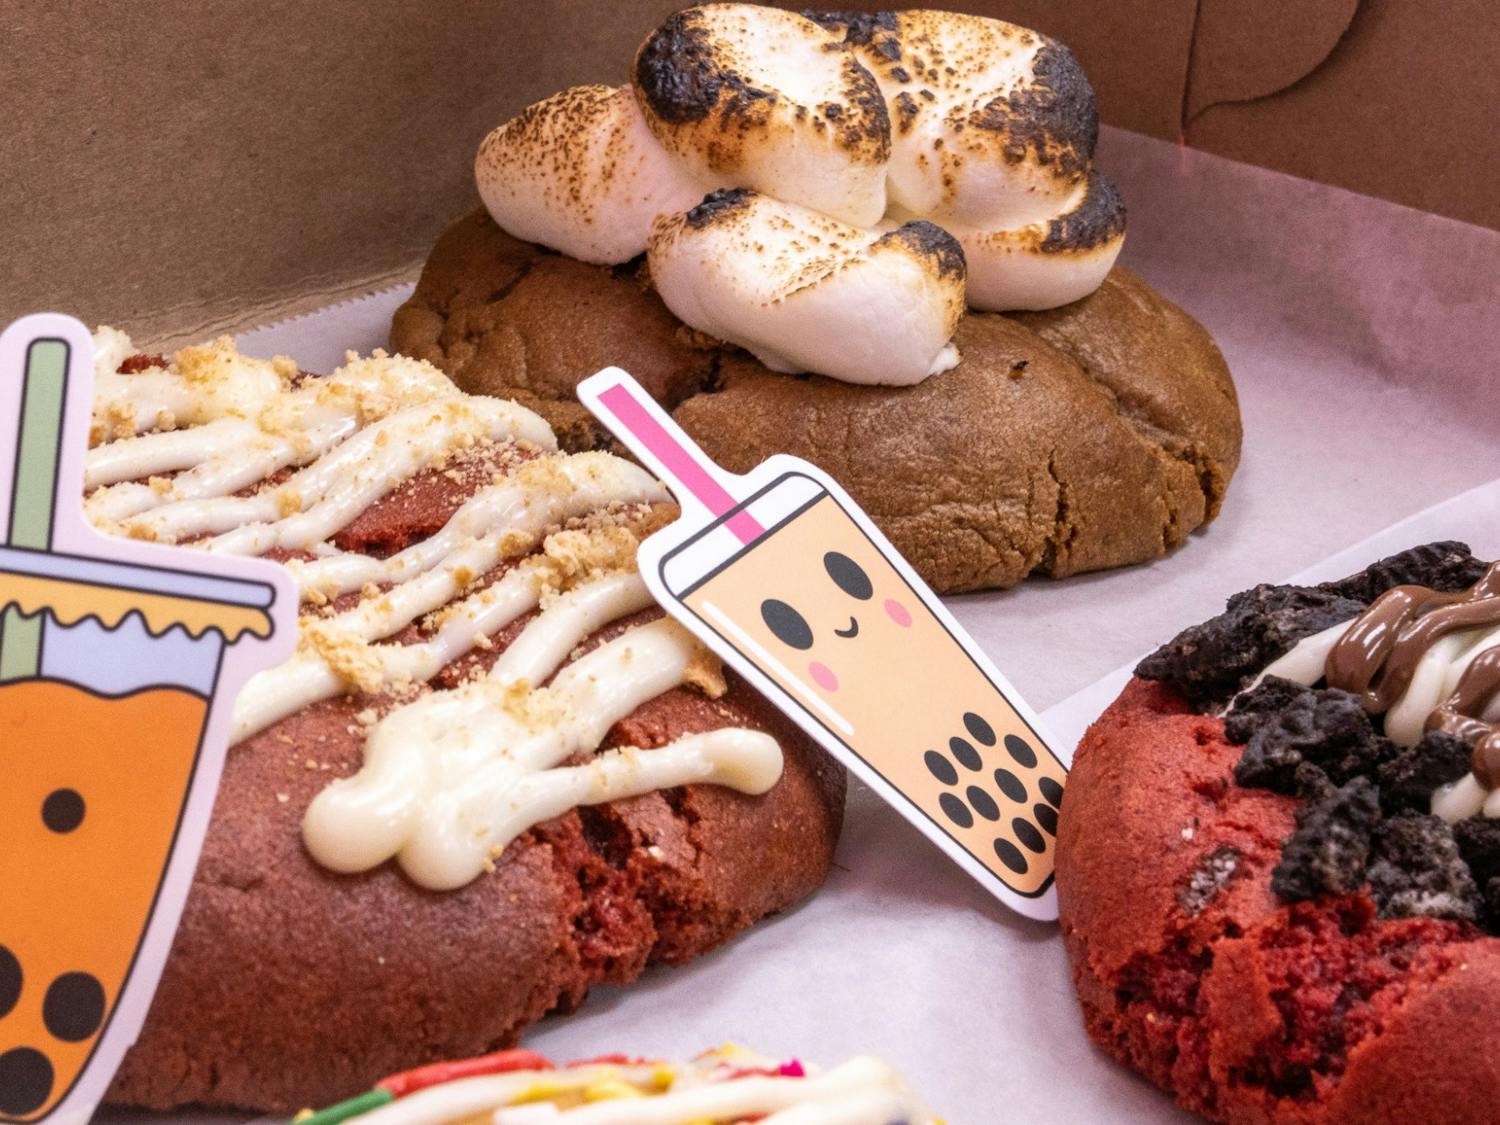 An assortment of cookies from Mingos Cookies shop in Lexington on Feb. 14, 2022. The cookie and bubble tea shop offers a large variety of specialty cookies ranging from Oreo topped red velvet cookies, as well as sugar cookies with Cinnamon Toast Crunch crumbles.